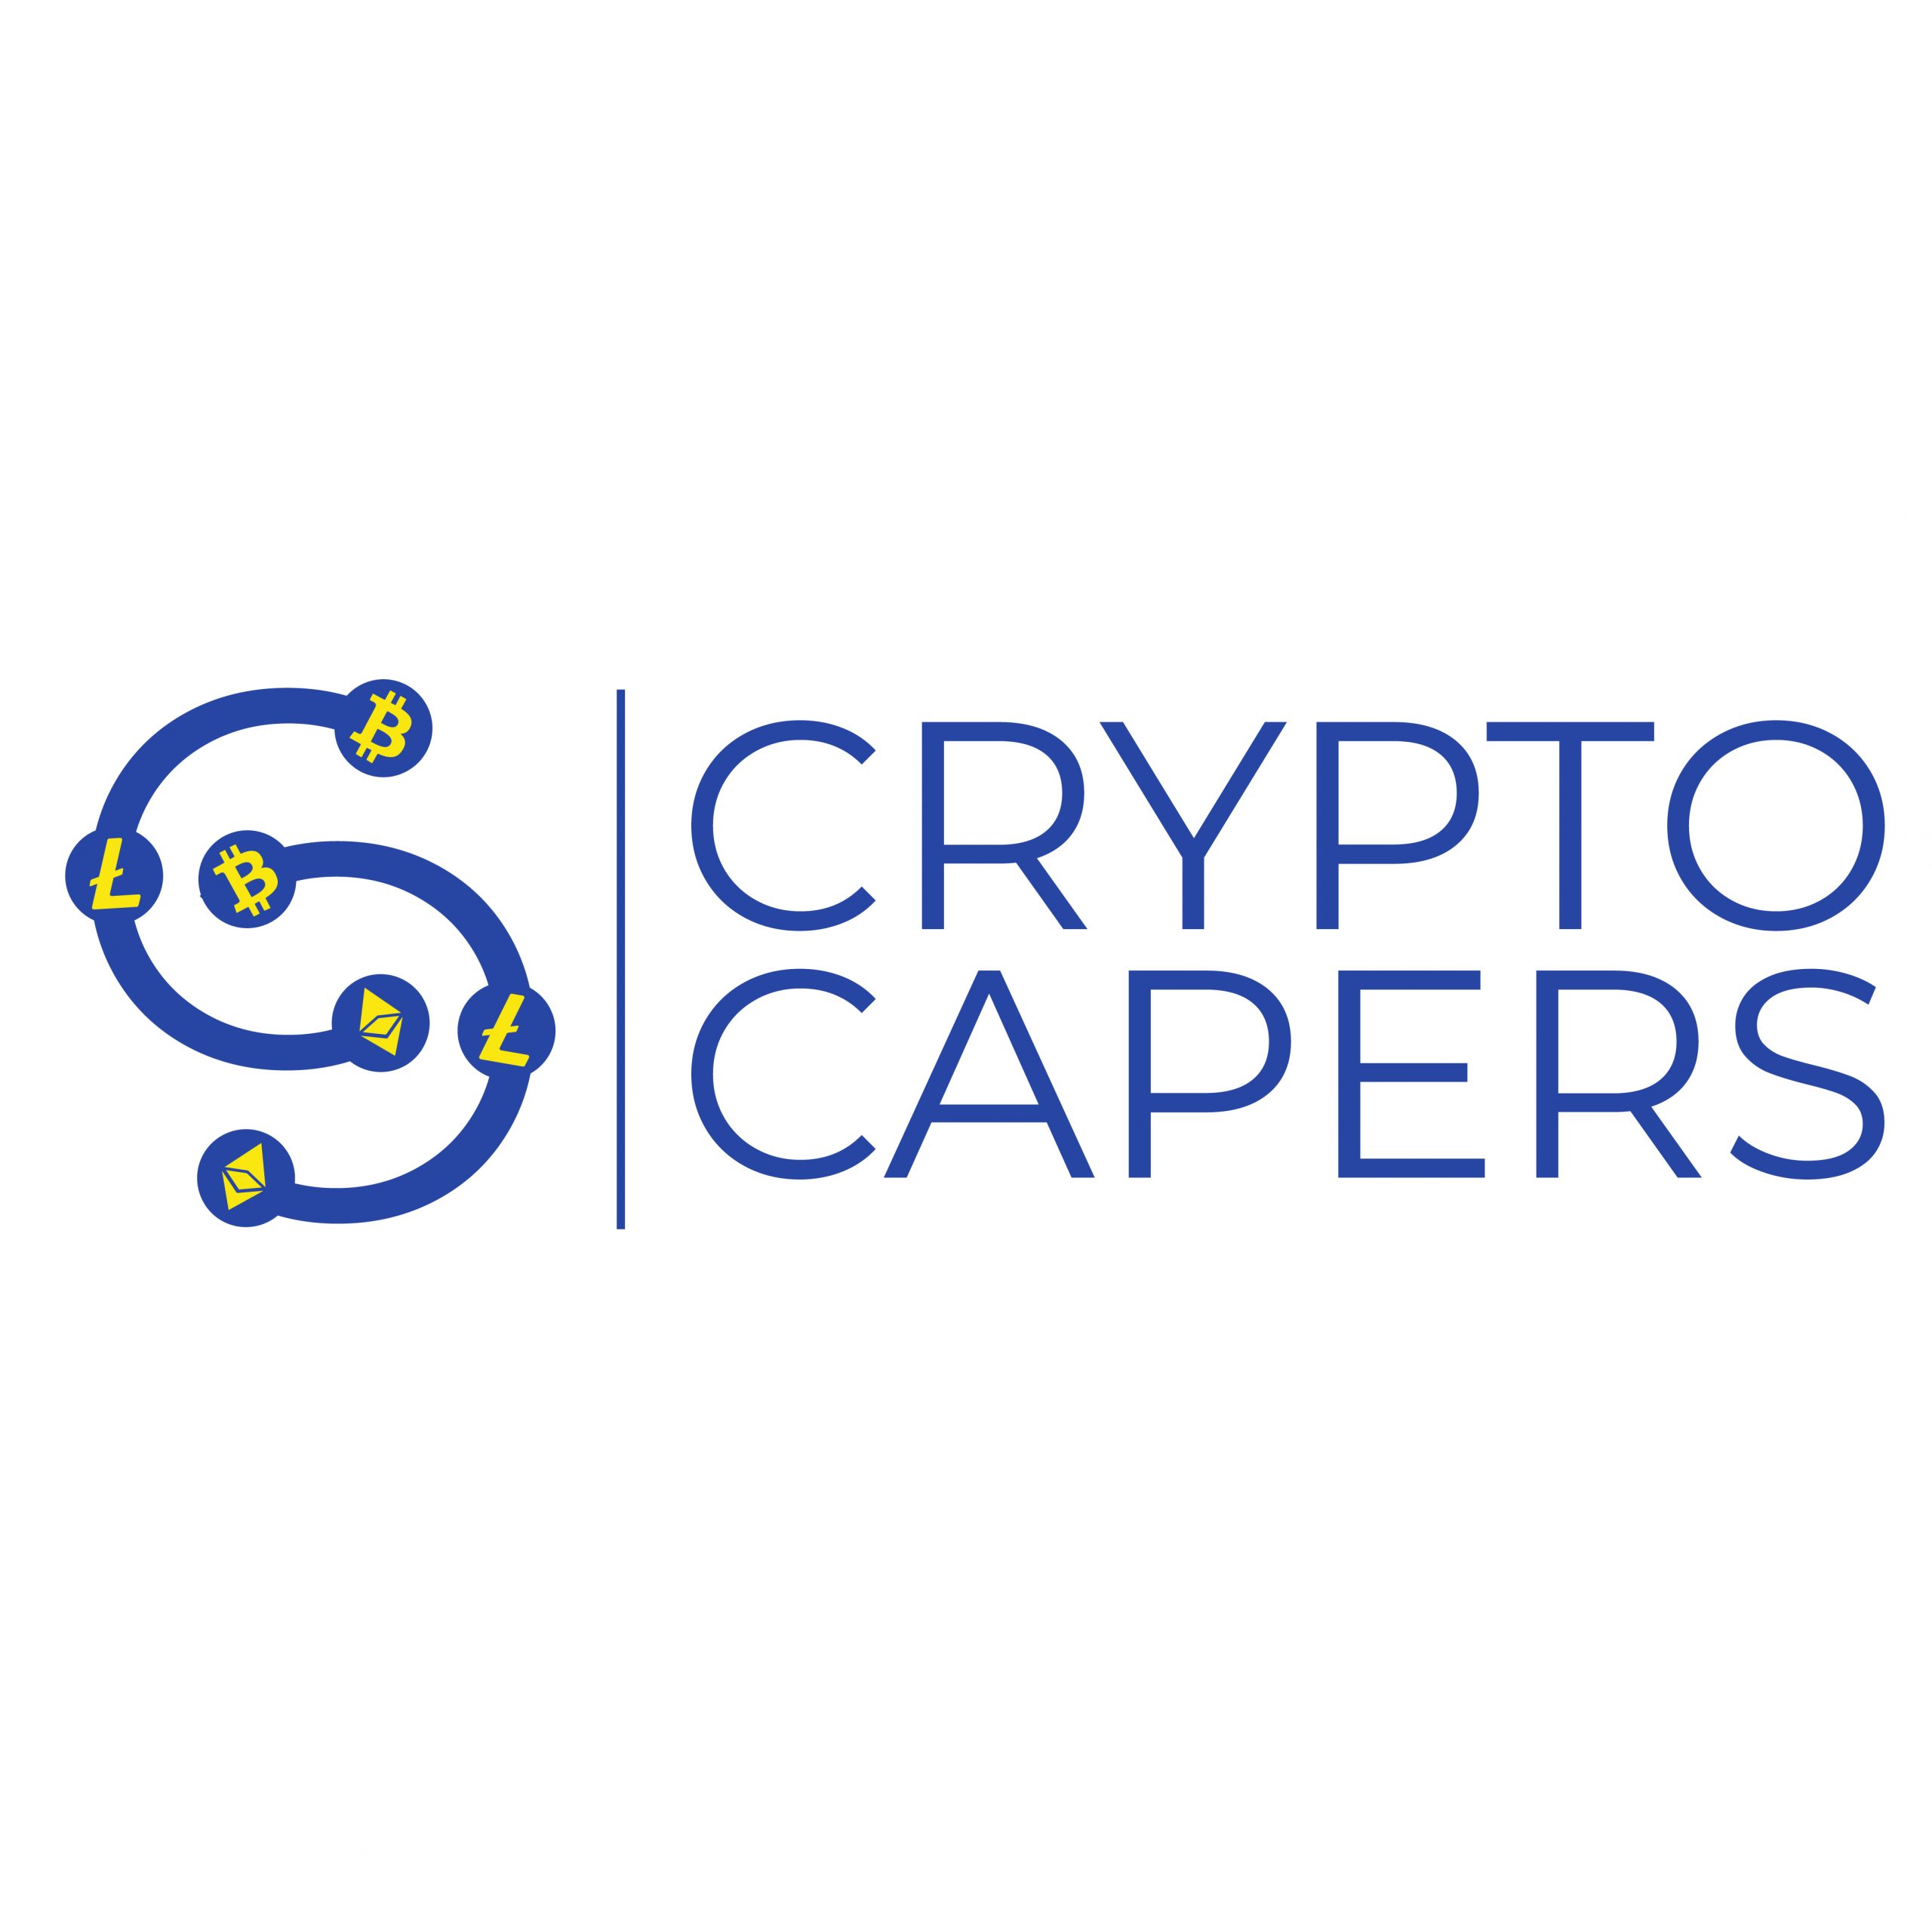 Bitcoin Price Predictions November 10 Crypto Capers - how much money would 3891 robuxs cost